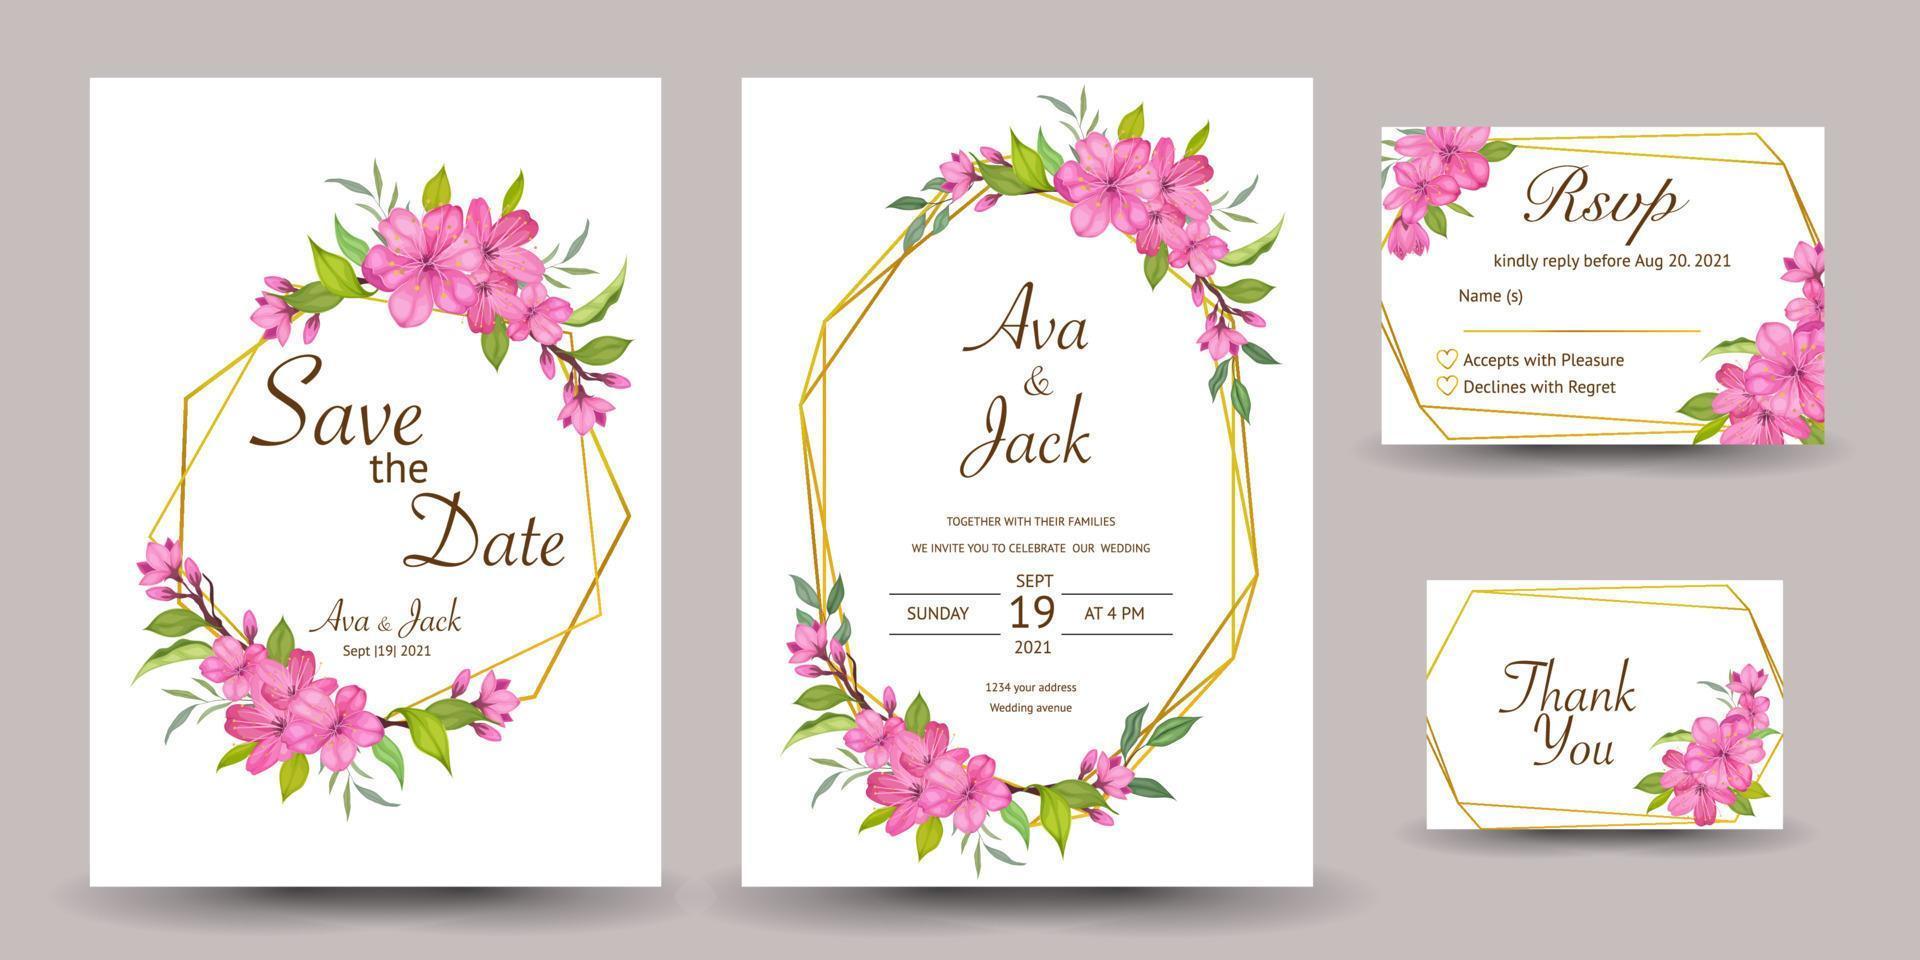 wedding invitation or greeting cards with flowers background design vector